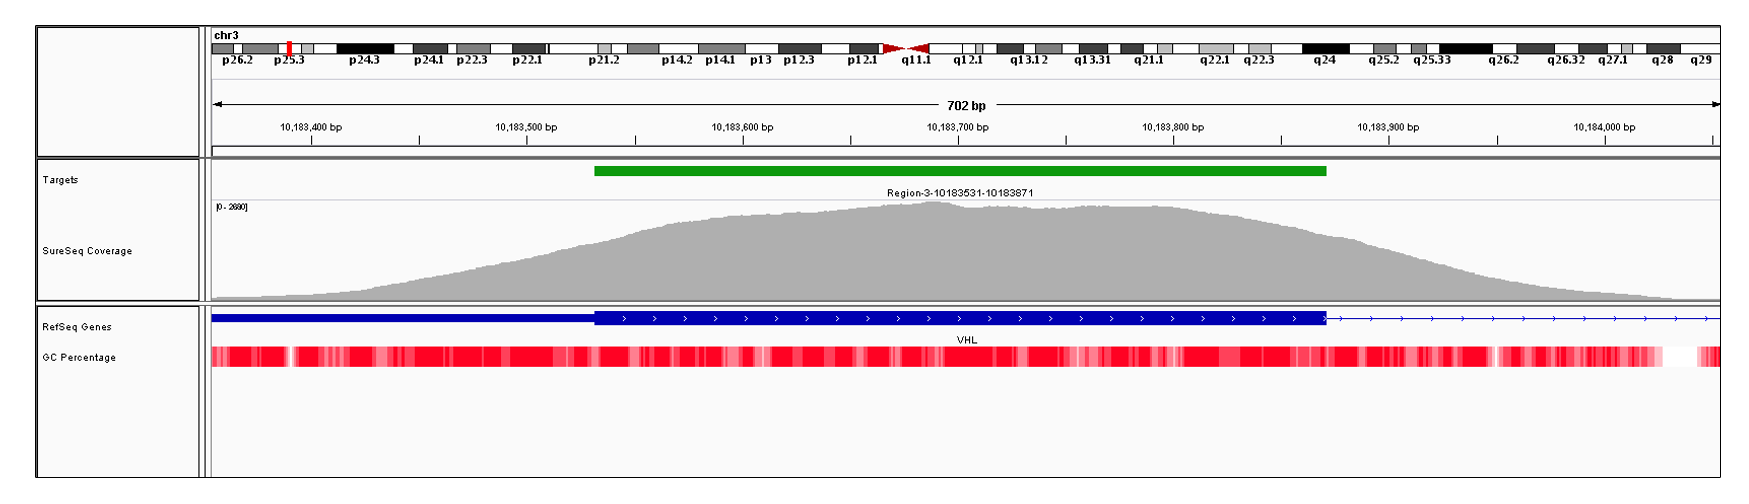 VHL Exon 1 (hg19 chr3:10183319-10183871). Depth of coverage per base (grey). Targeted region (green). Gene coding region as defined by RefSeq (blue). GC percentage (red). Image